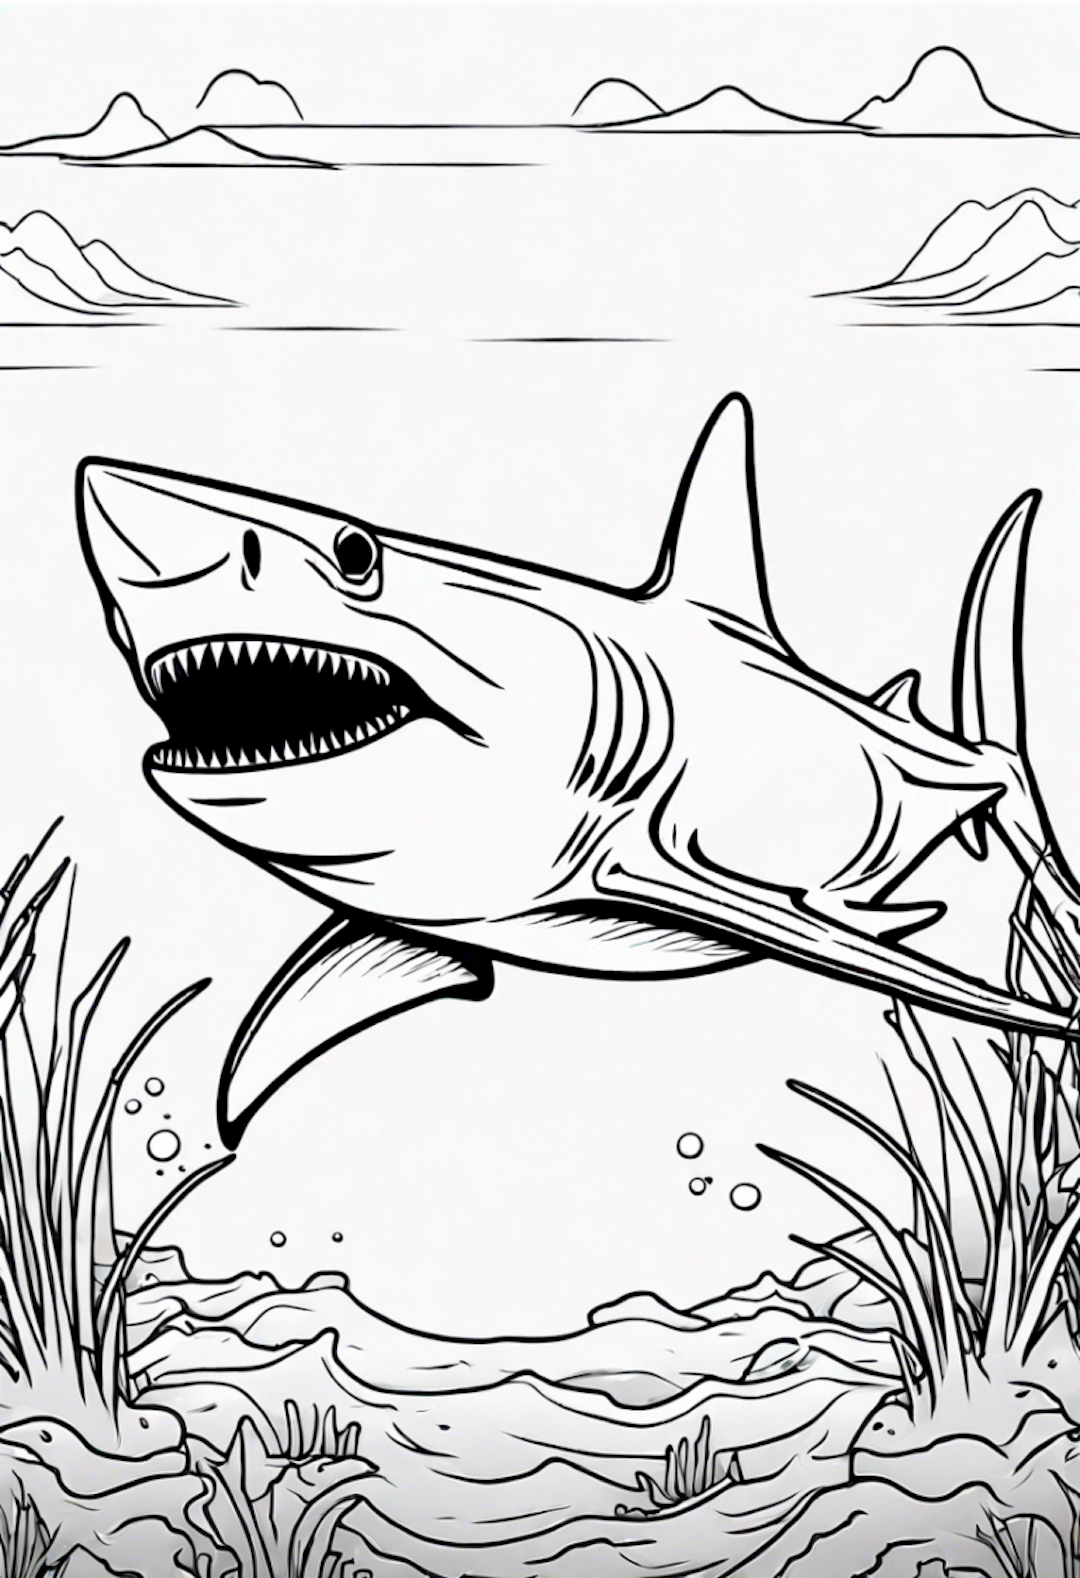 Saw Shark coloring pages